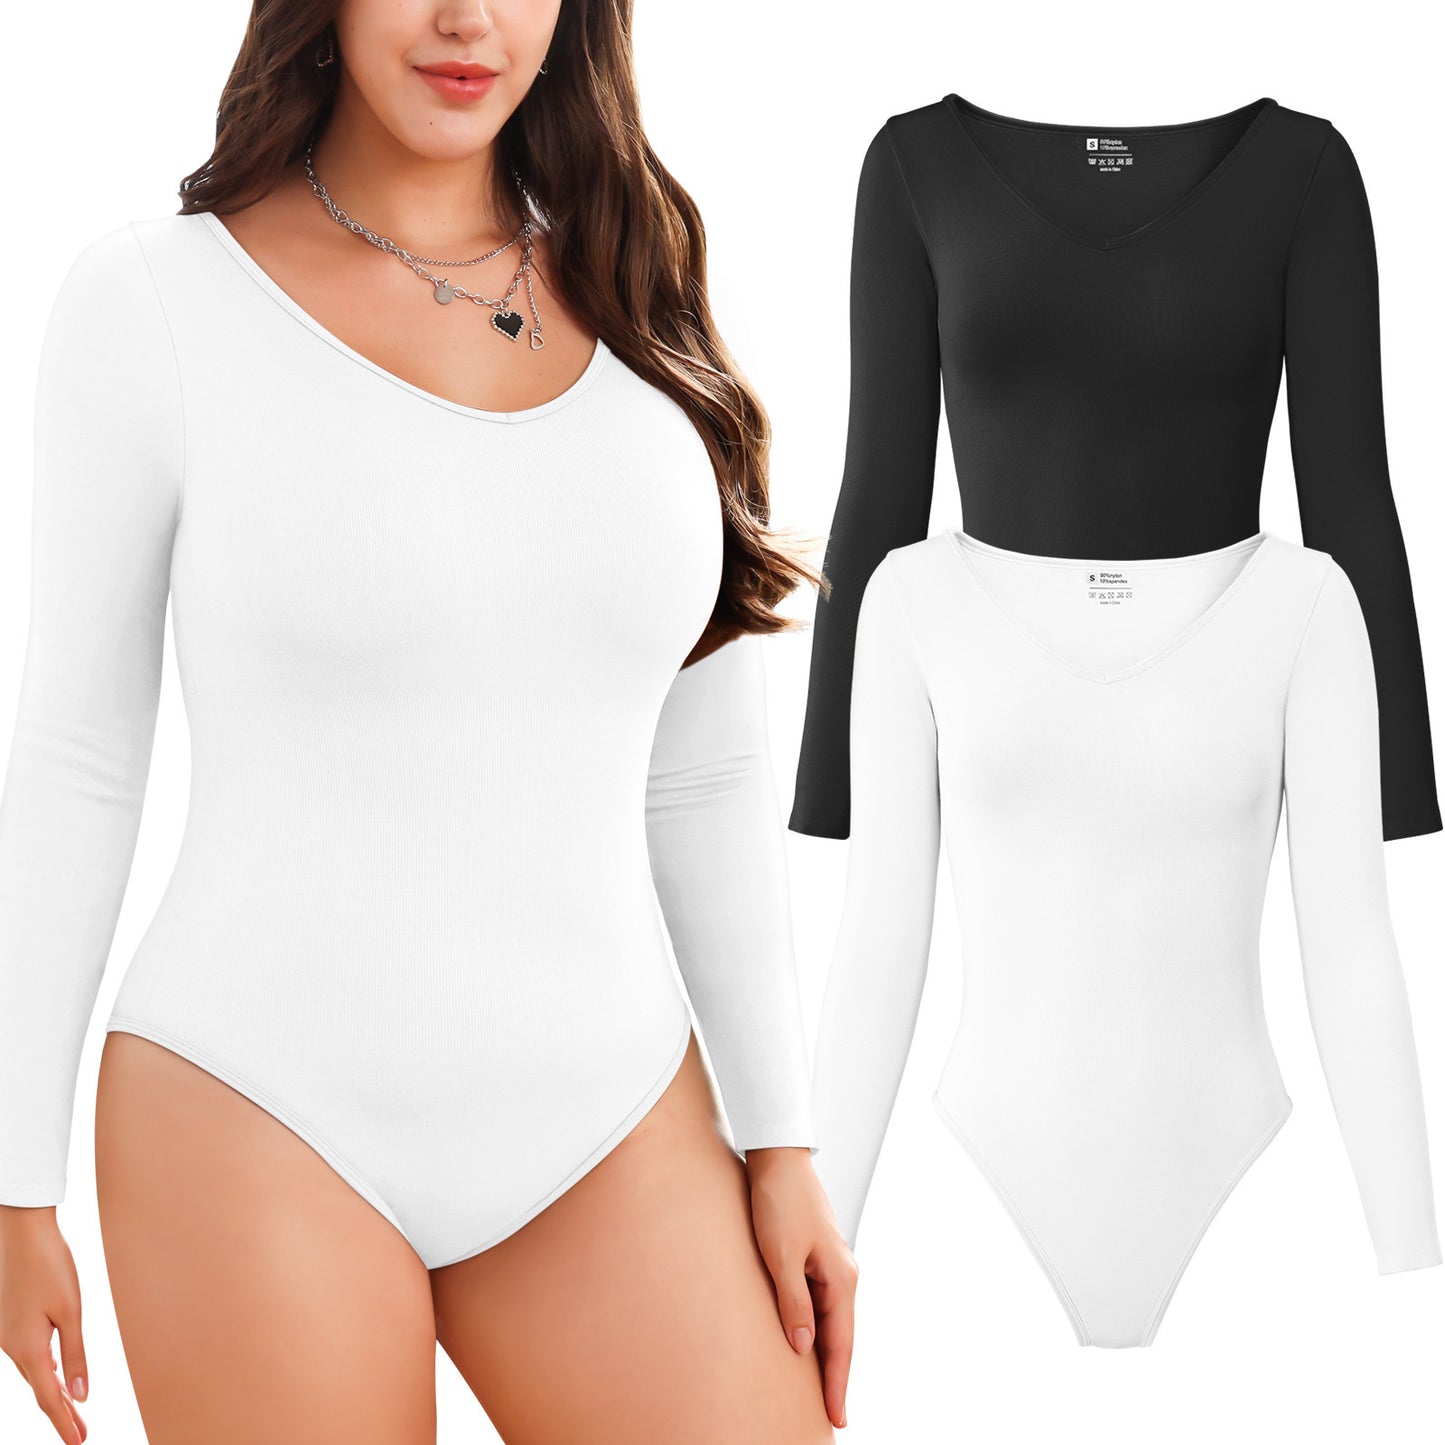 Women Long Sleeve Bodysuits 2 Pack, V Neck Sexy Tops with Ribbed Seamless Design